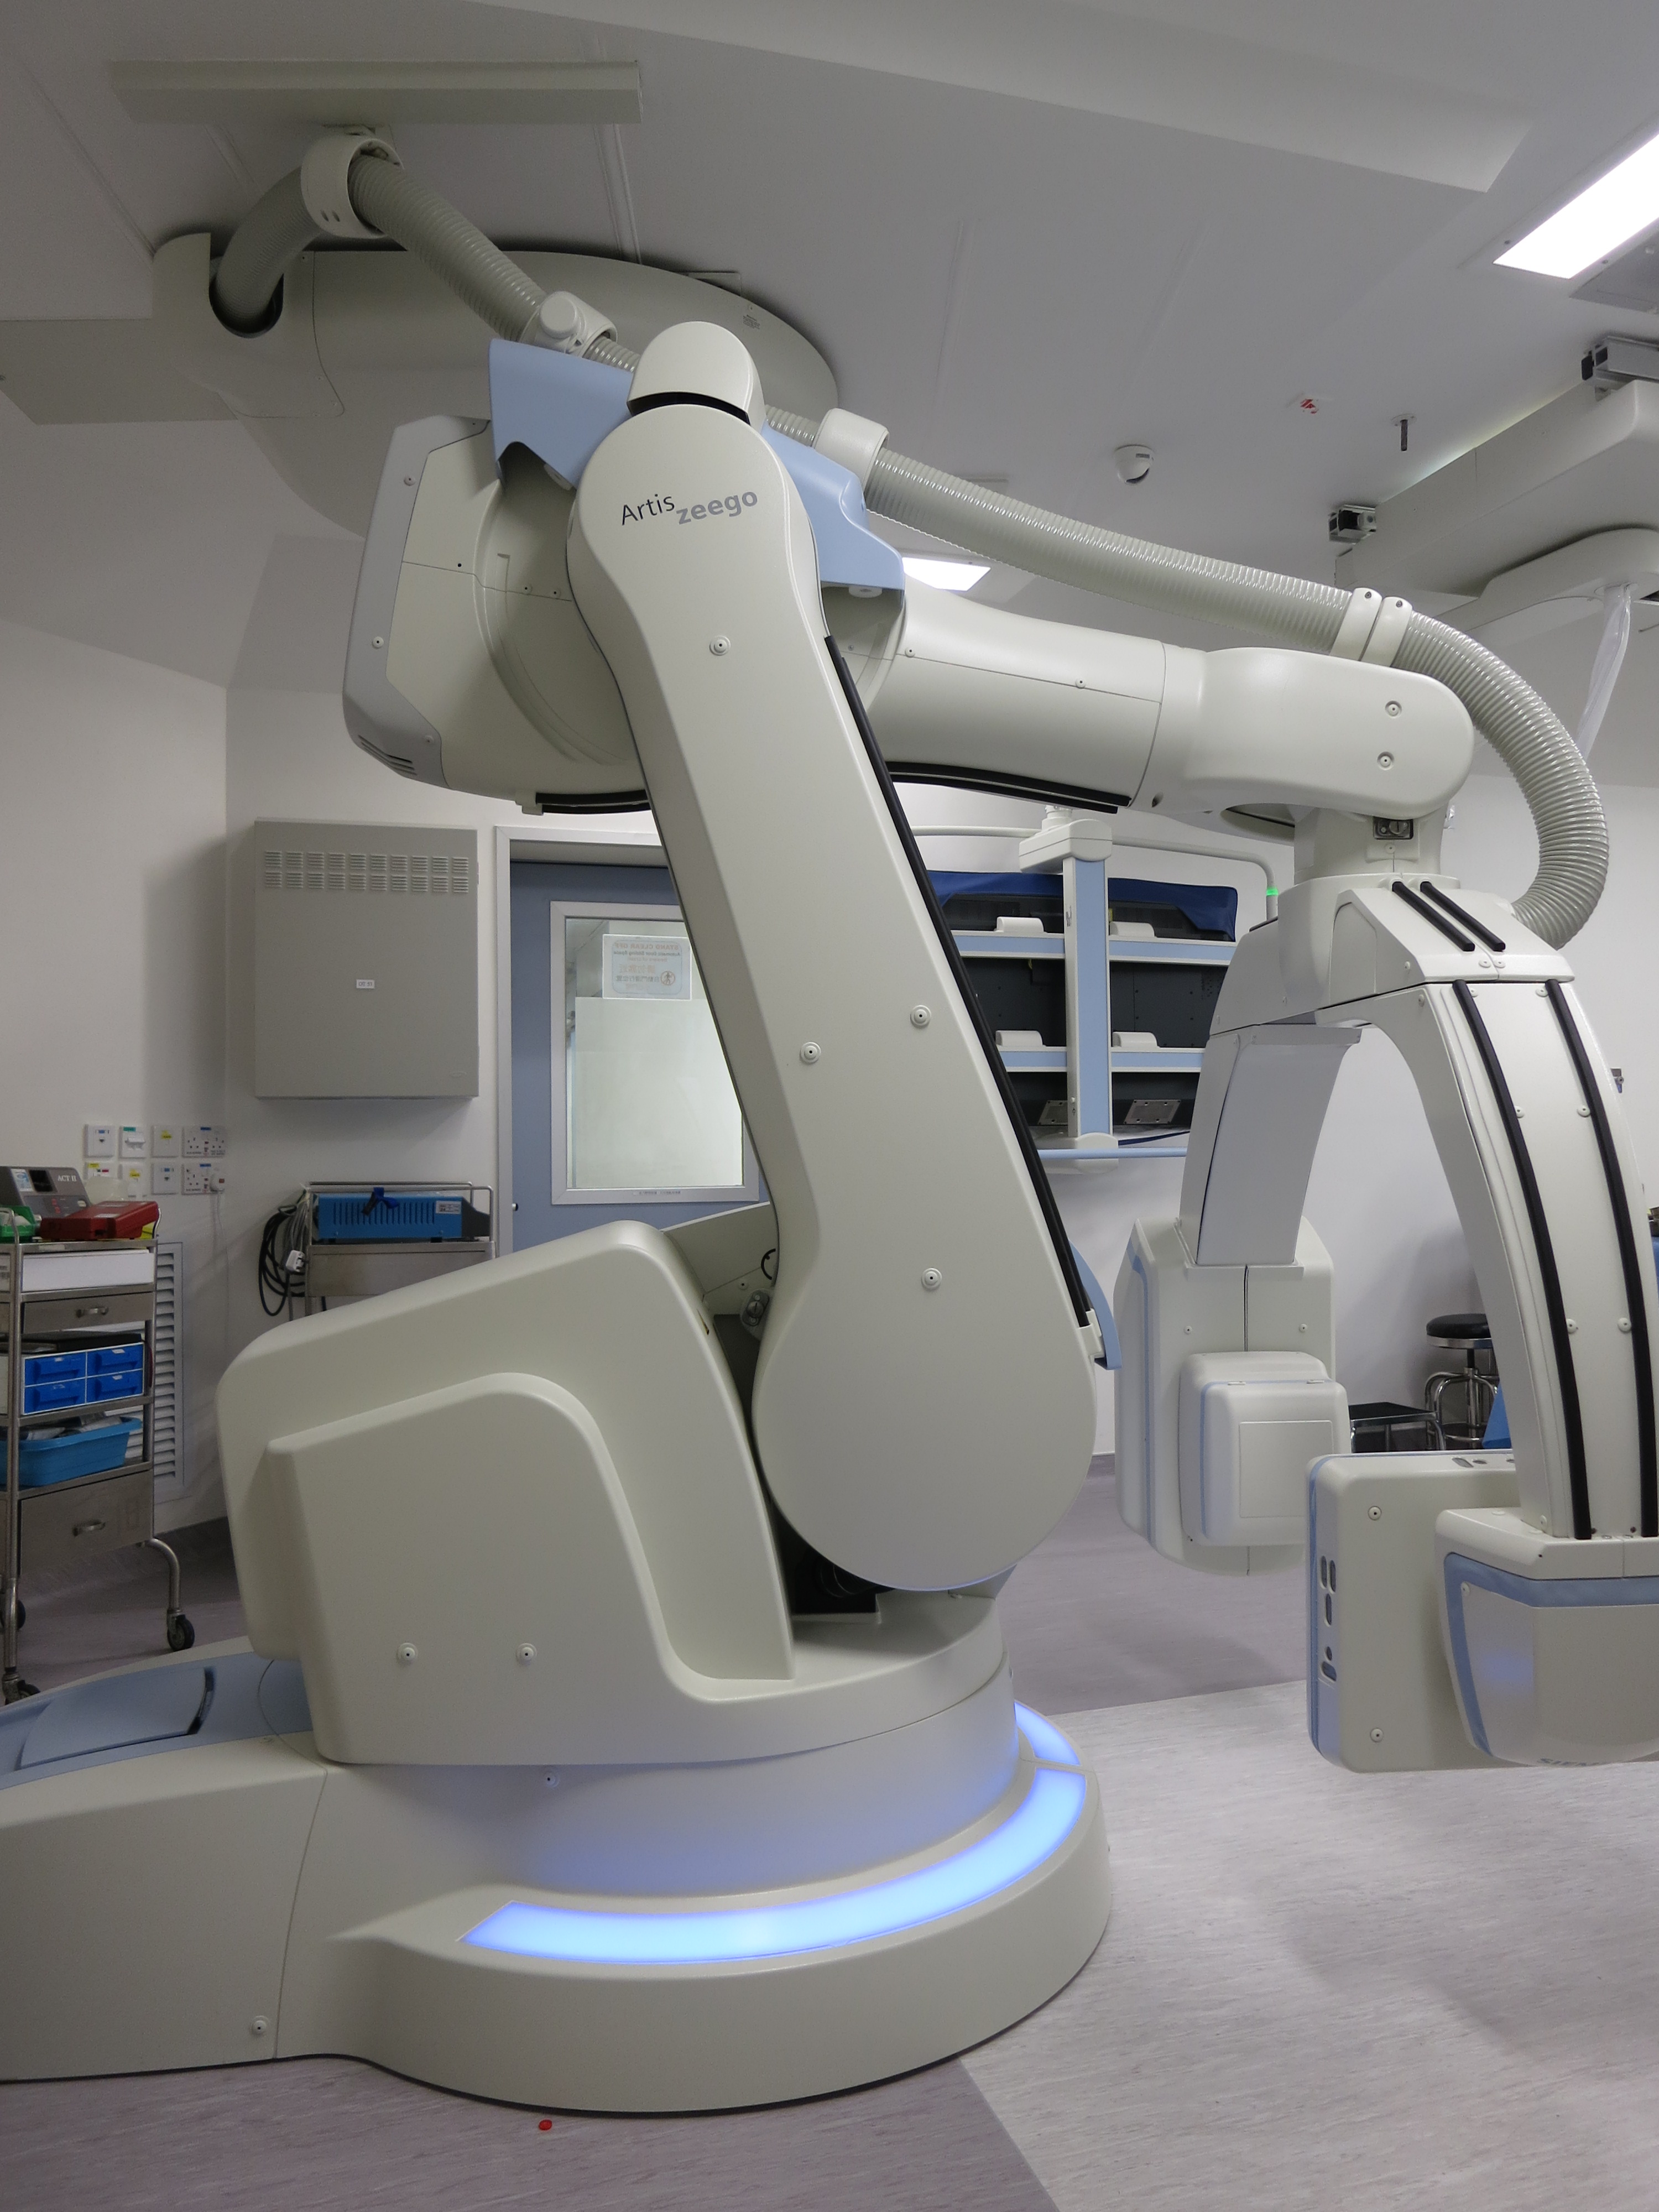 Robotic C-arm imaging device enables a 360-degree thorough examination of patients.